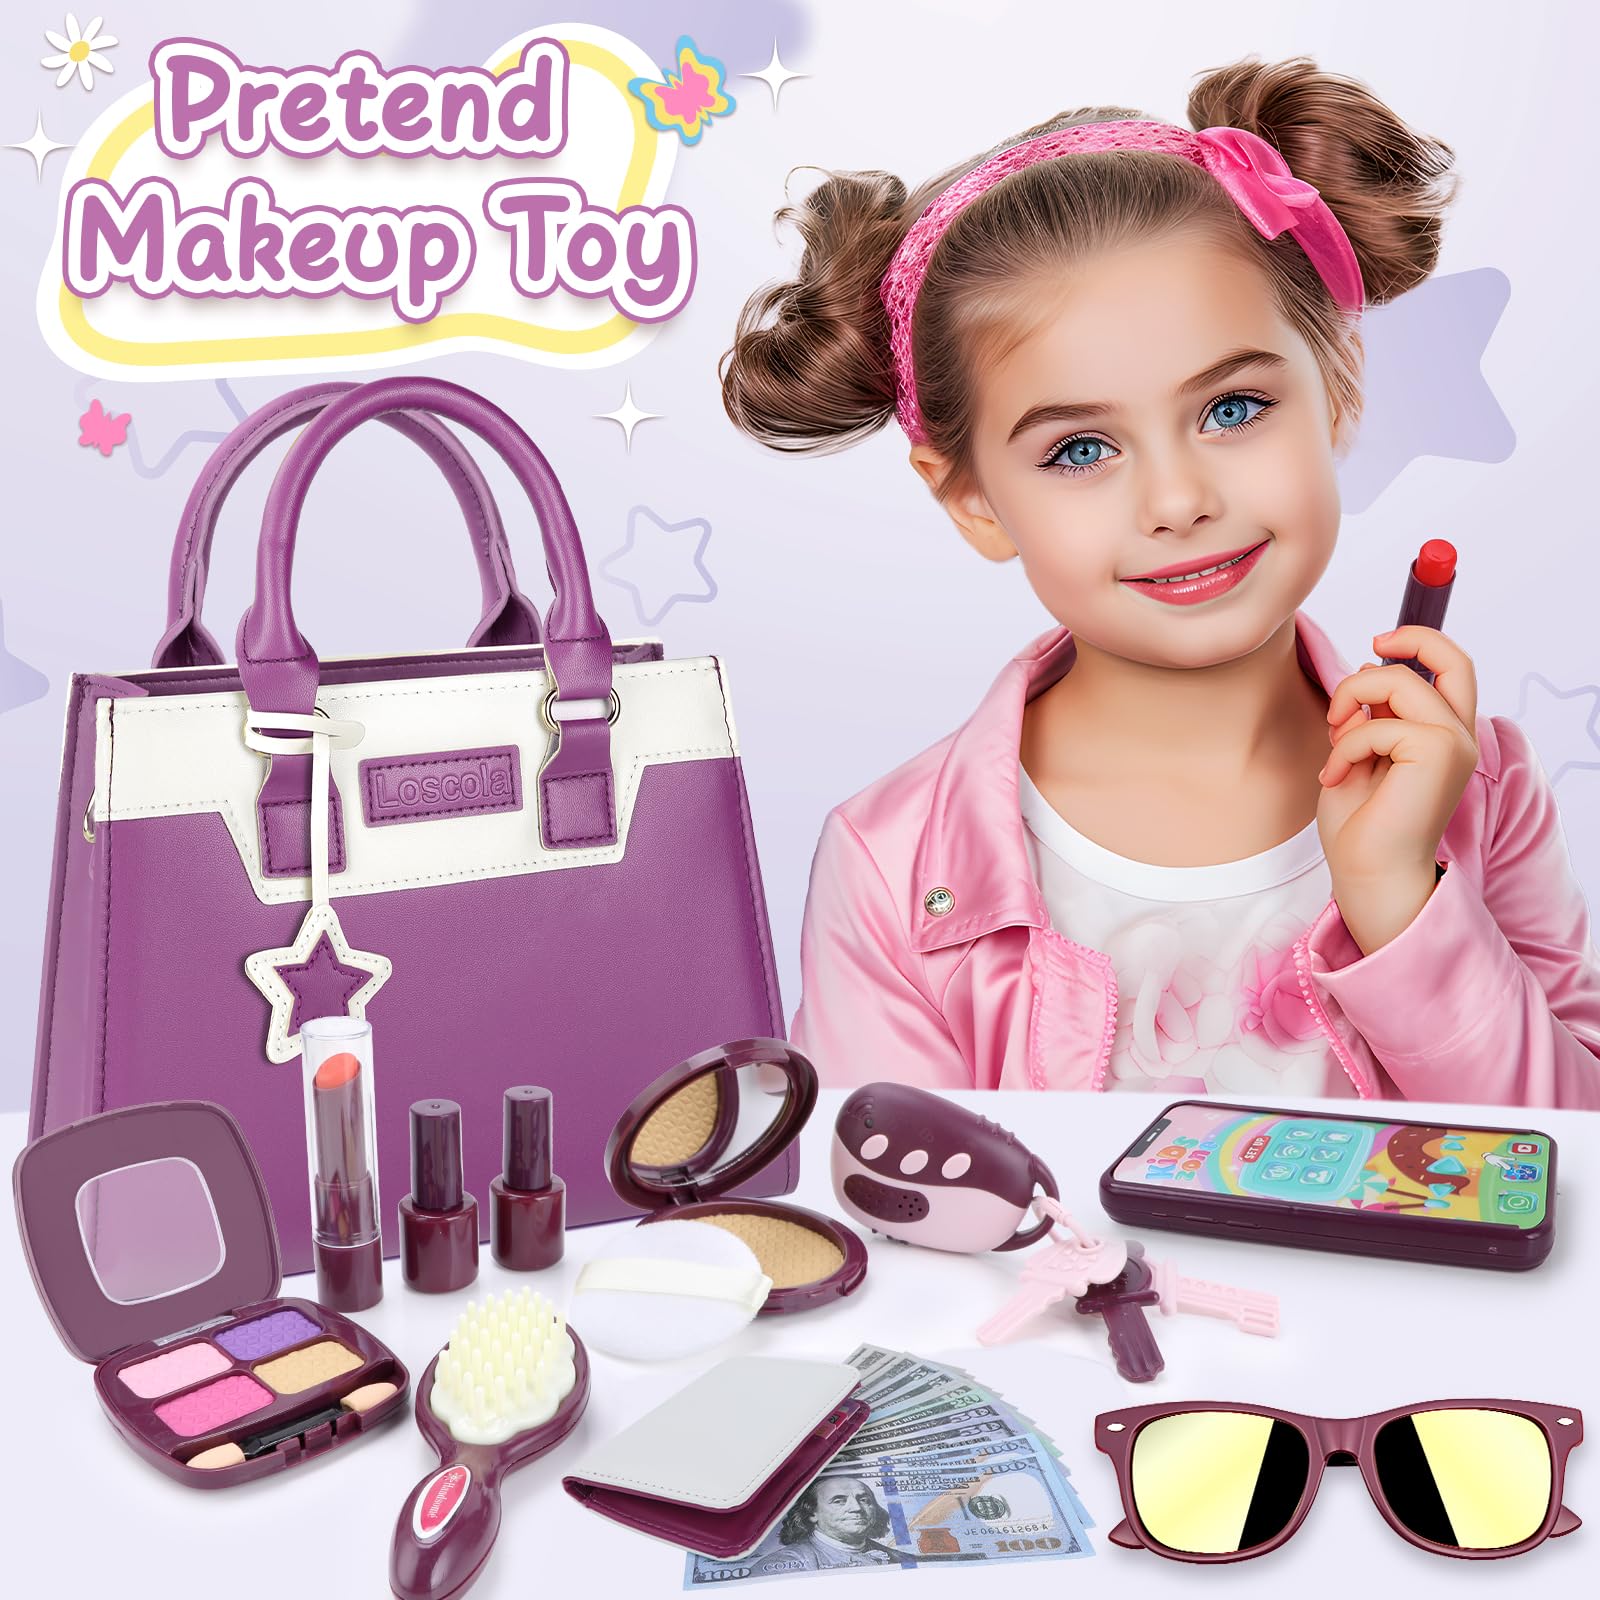 Amazon.com: Little Girls Play Purse, 31 Pcs Kids Toy Purse, Toddler Purse  with Handbag, Makeup Kit, Wallet, Sunglasses, Phone, Car Keys and Credit  Cards for 3-6 Year Old Girls Birthday Gift :